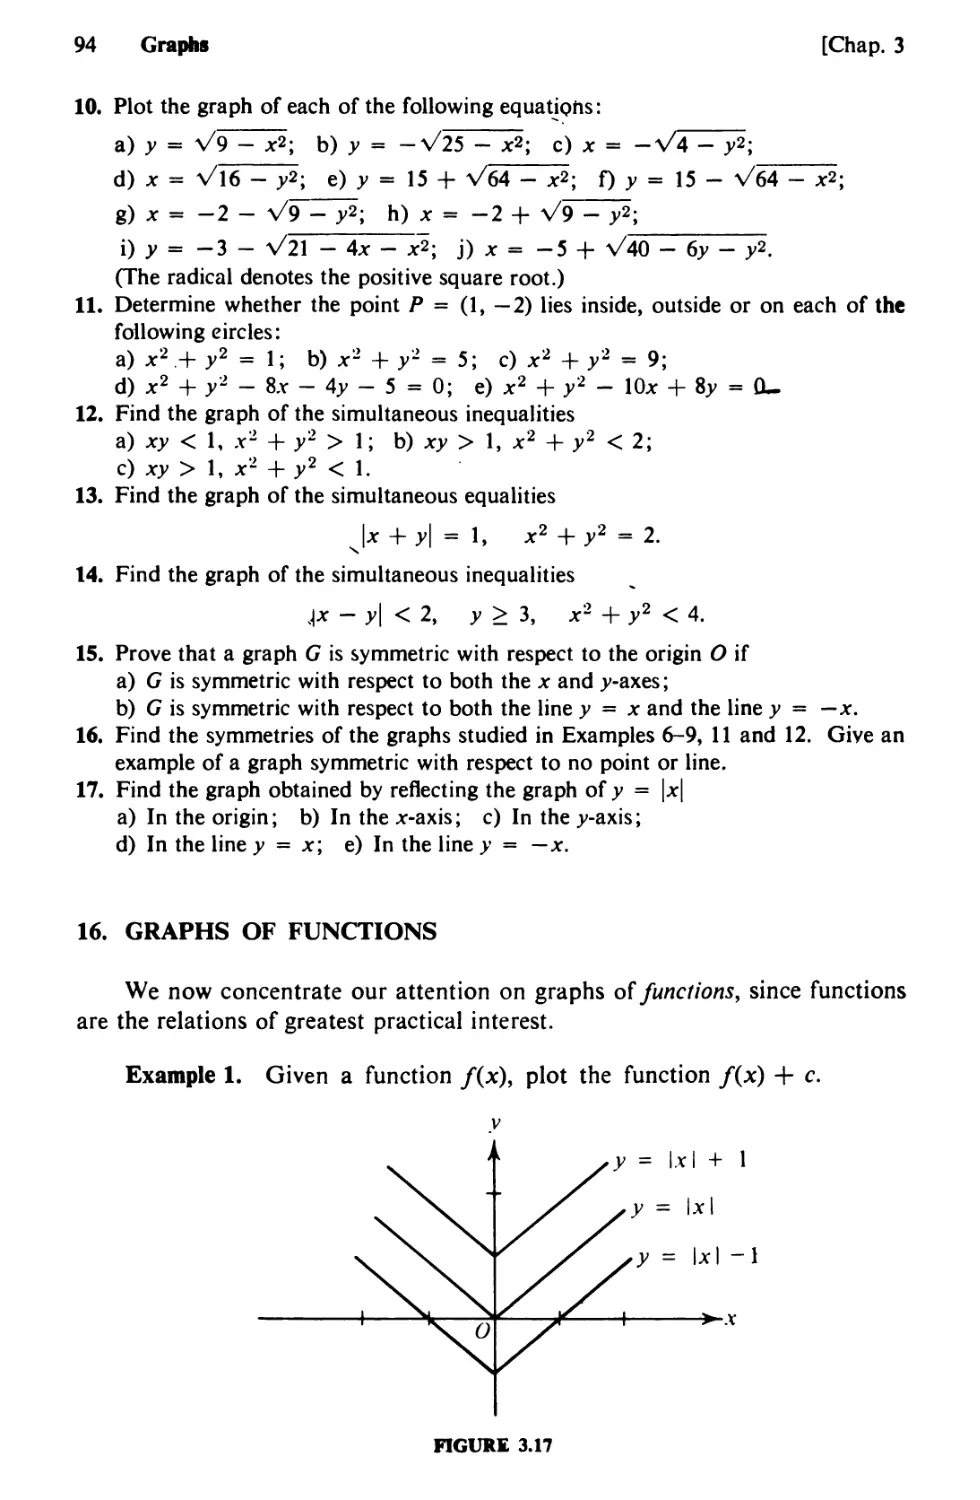 16. Graphs of Functions